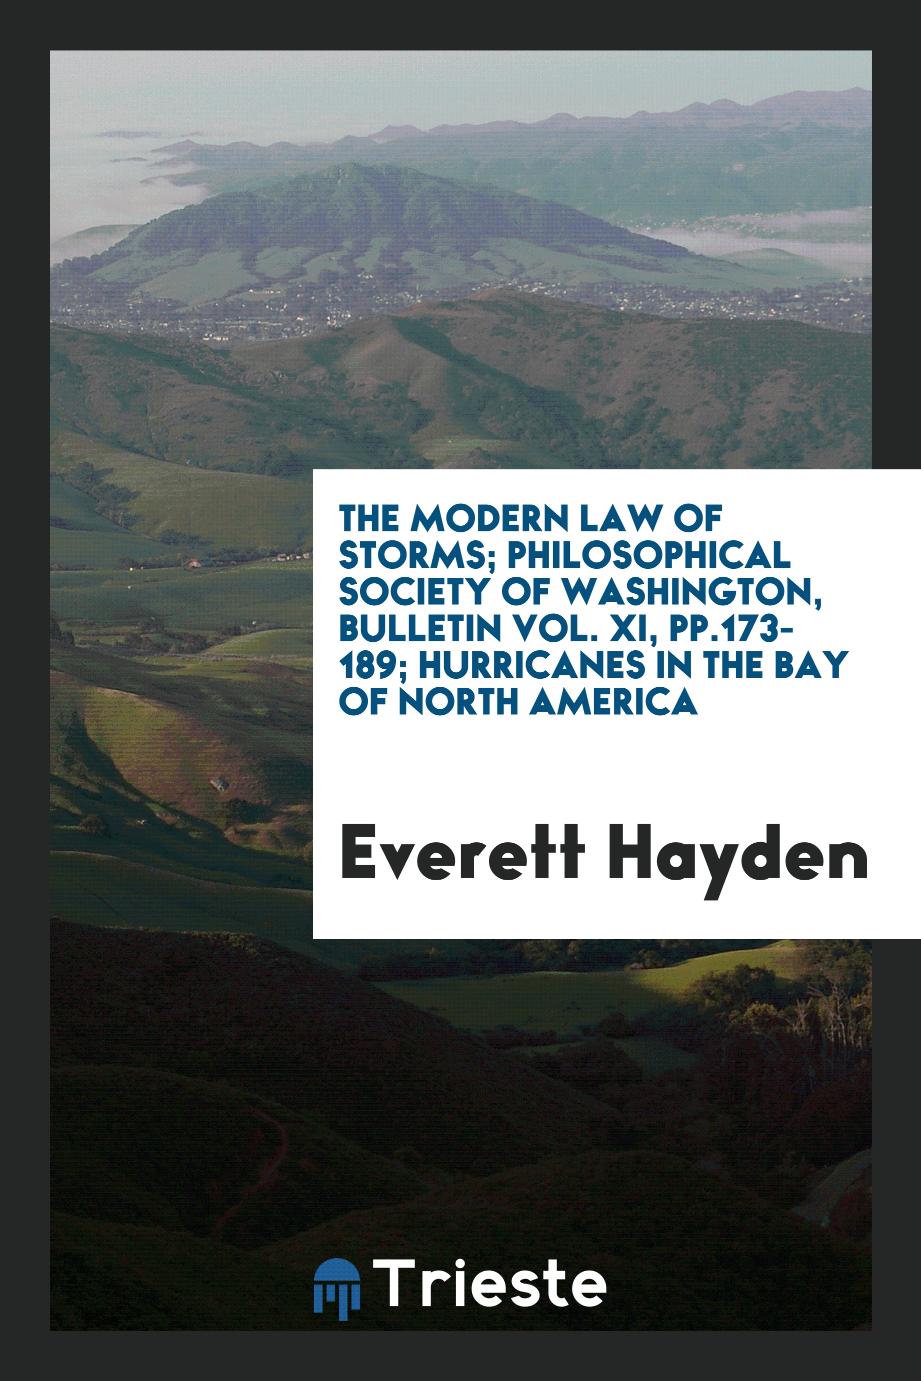 The Modern Law of Storms; Philosophical society of Washington, bulletin Vol. XI, pp.173- 189; Hurricanes in the bay of north America